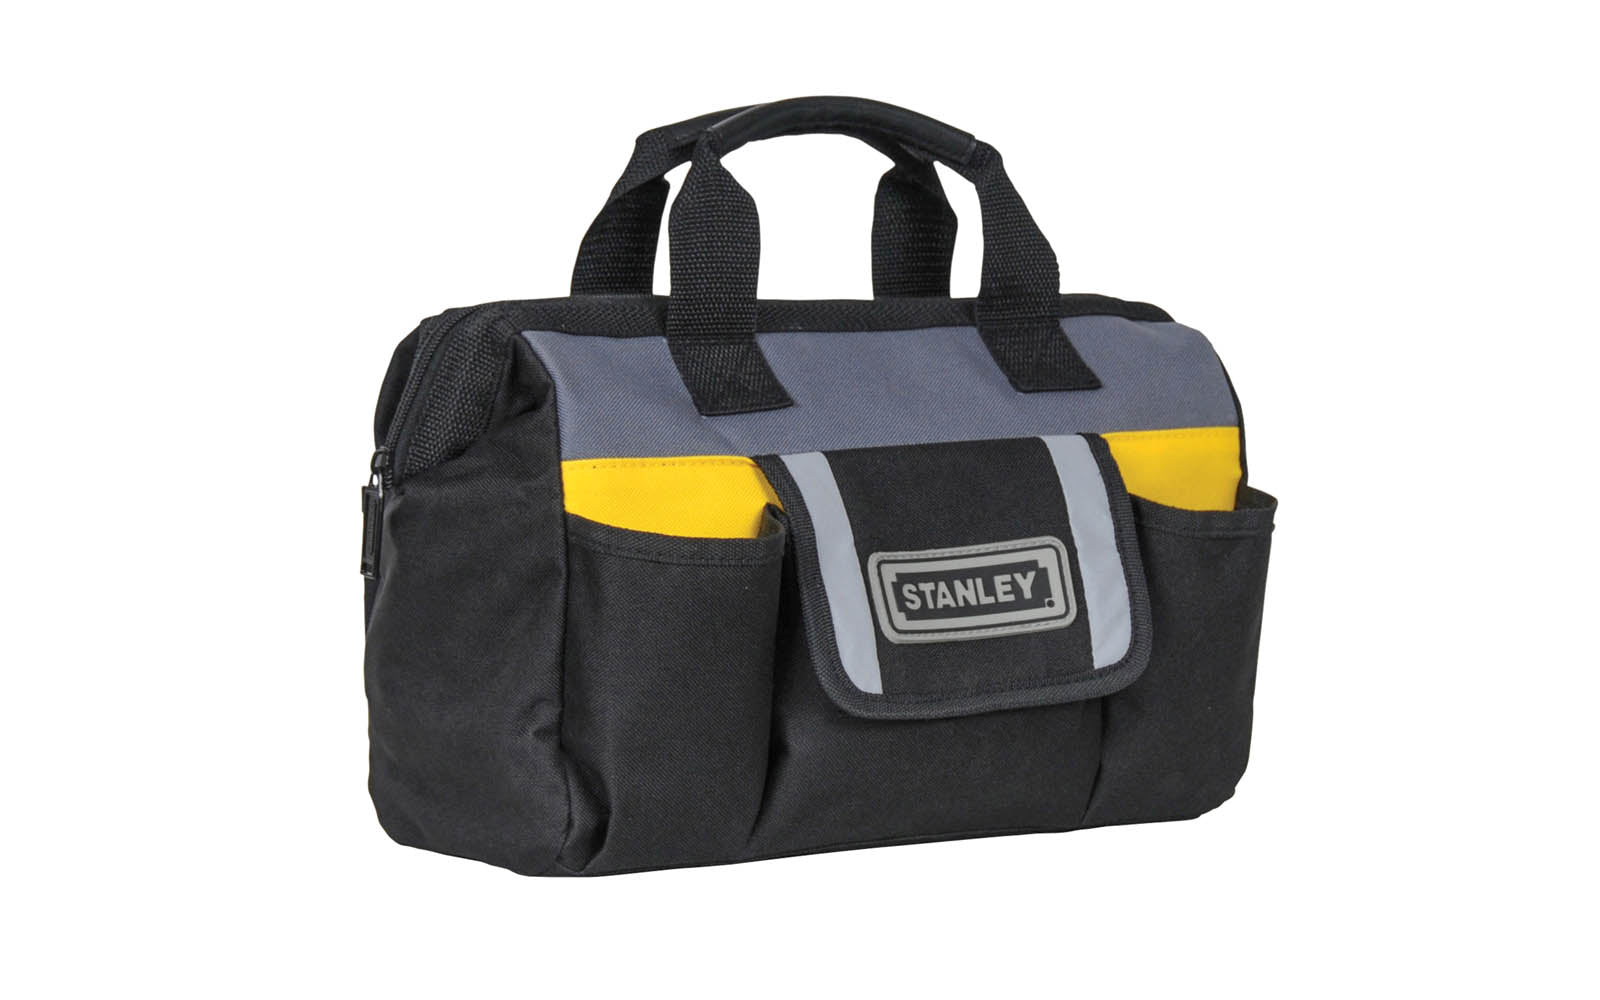 Stanley 12" Tool Bag is ideal for carrying hand tools & the adjustable strap allows for easy access to contents. Durable 600 x 600 denier polyester fabric that is hardwearing & strong. Tool bag is great for carrying various hand tools. Multiple internal & external pockets for organization. Model STST70574. 076174705744